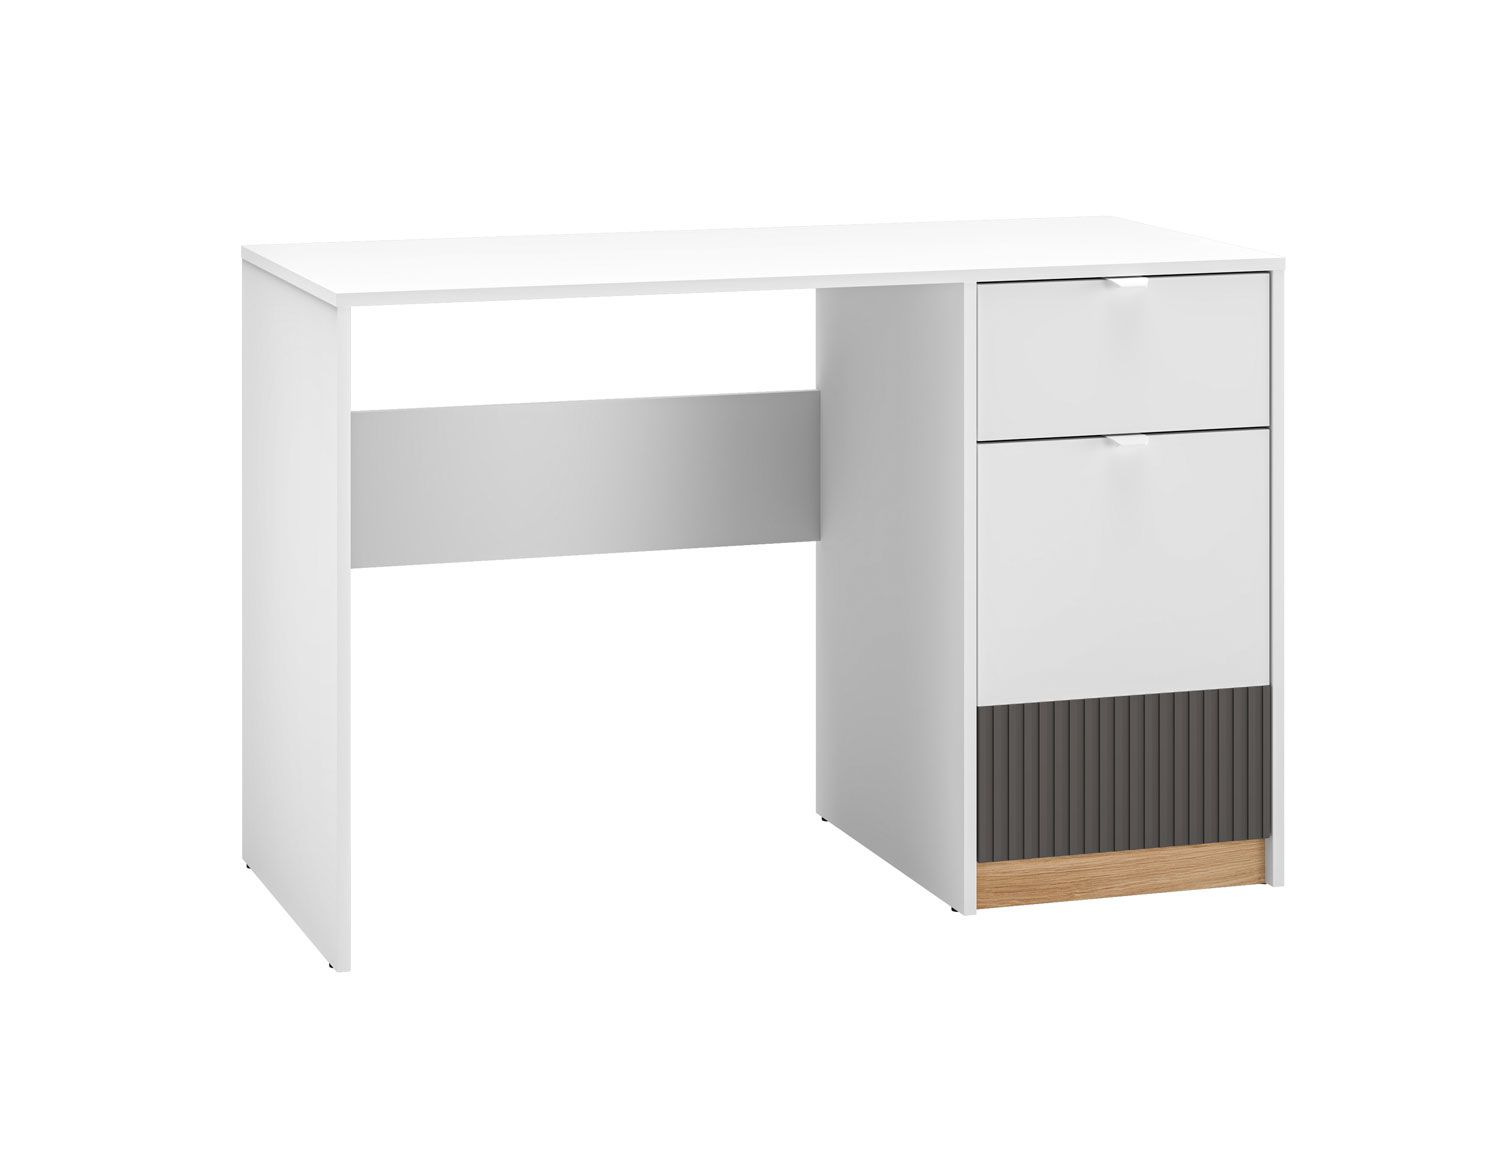 Modern desk with storage space Mackinac 08, soft-close system, ABS edge protection, color: white / oak / graphite matt, dimensions: 76 x 120 x 55 cm, with one drawer and two compartments